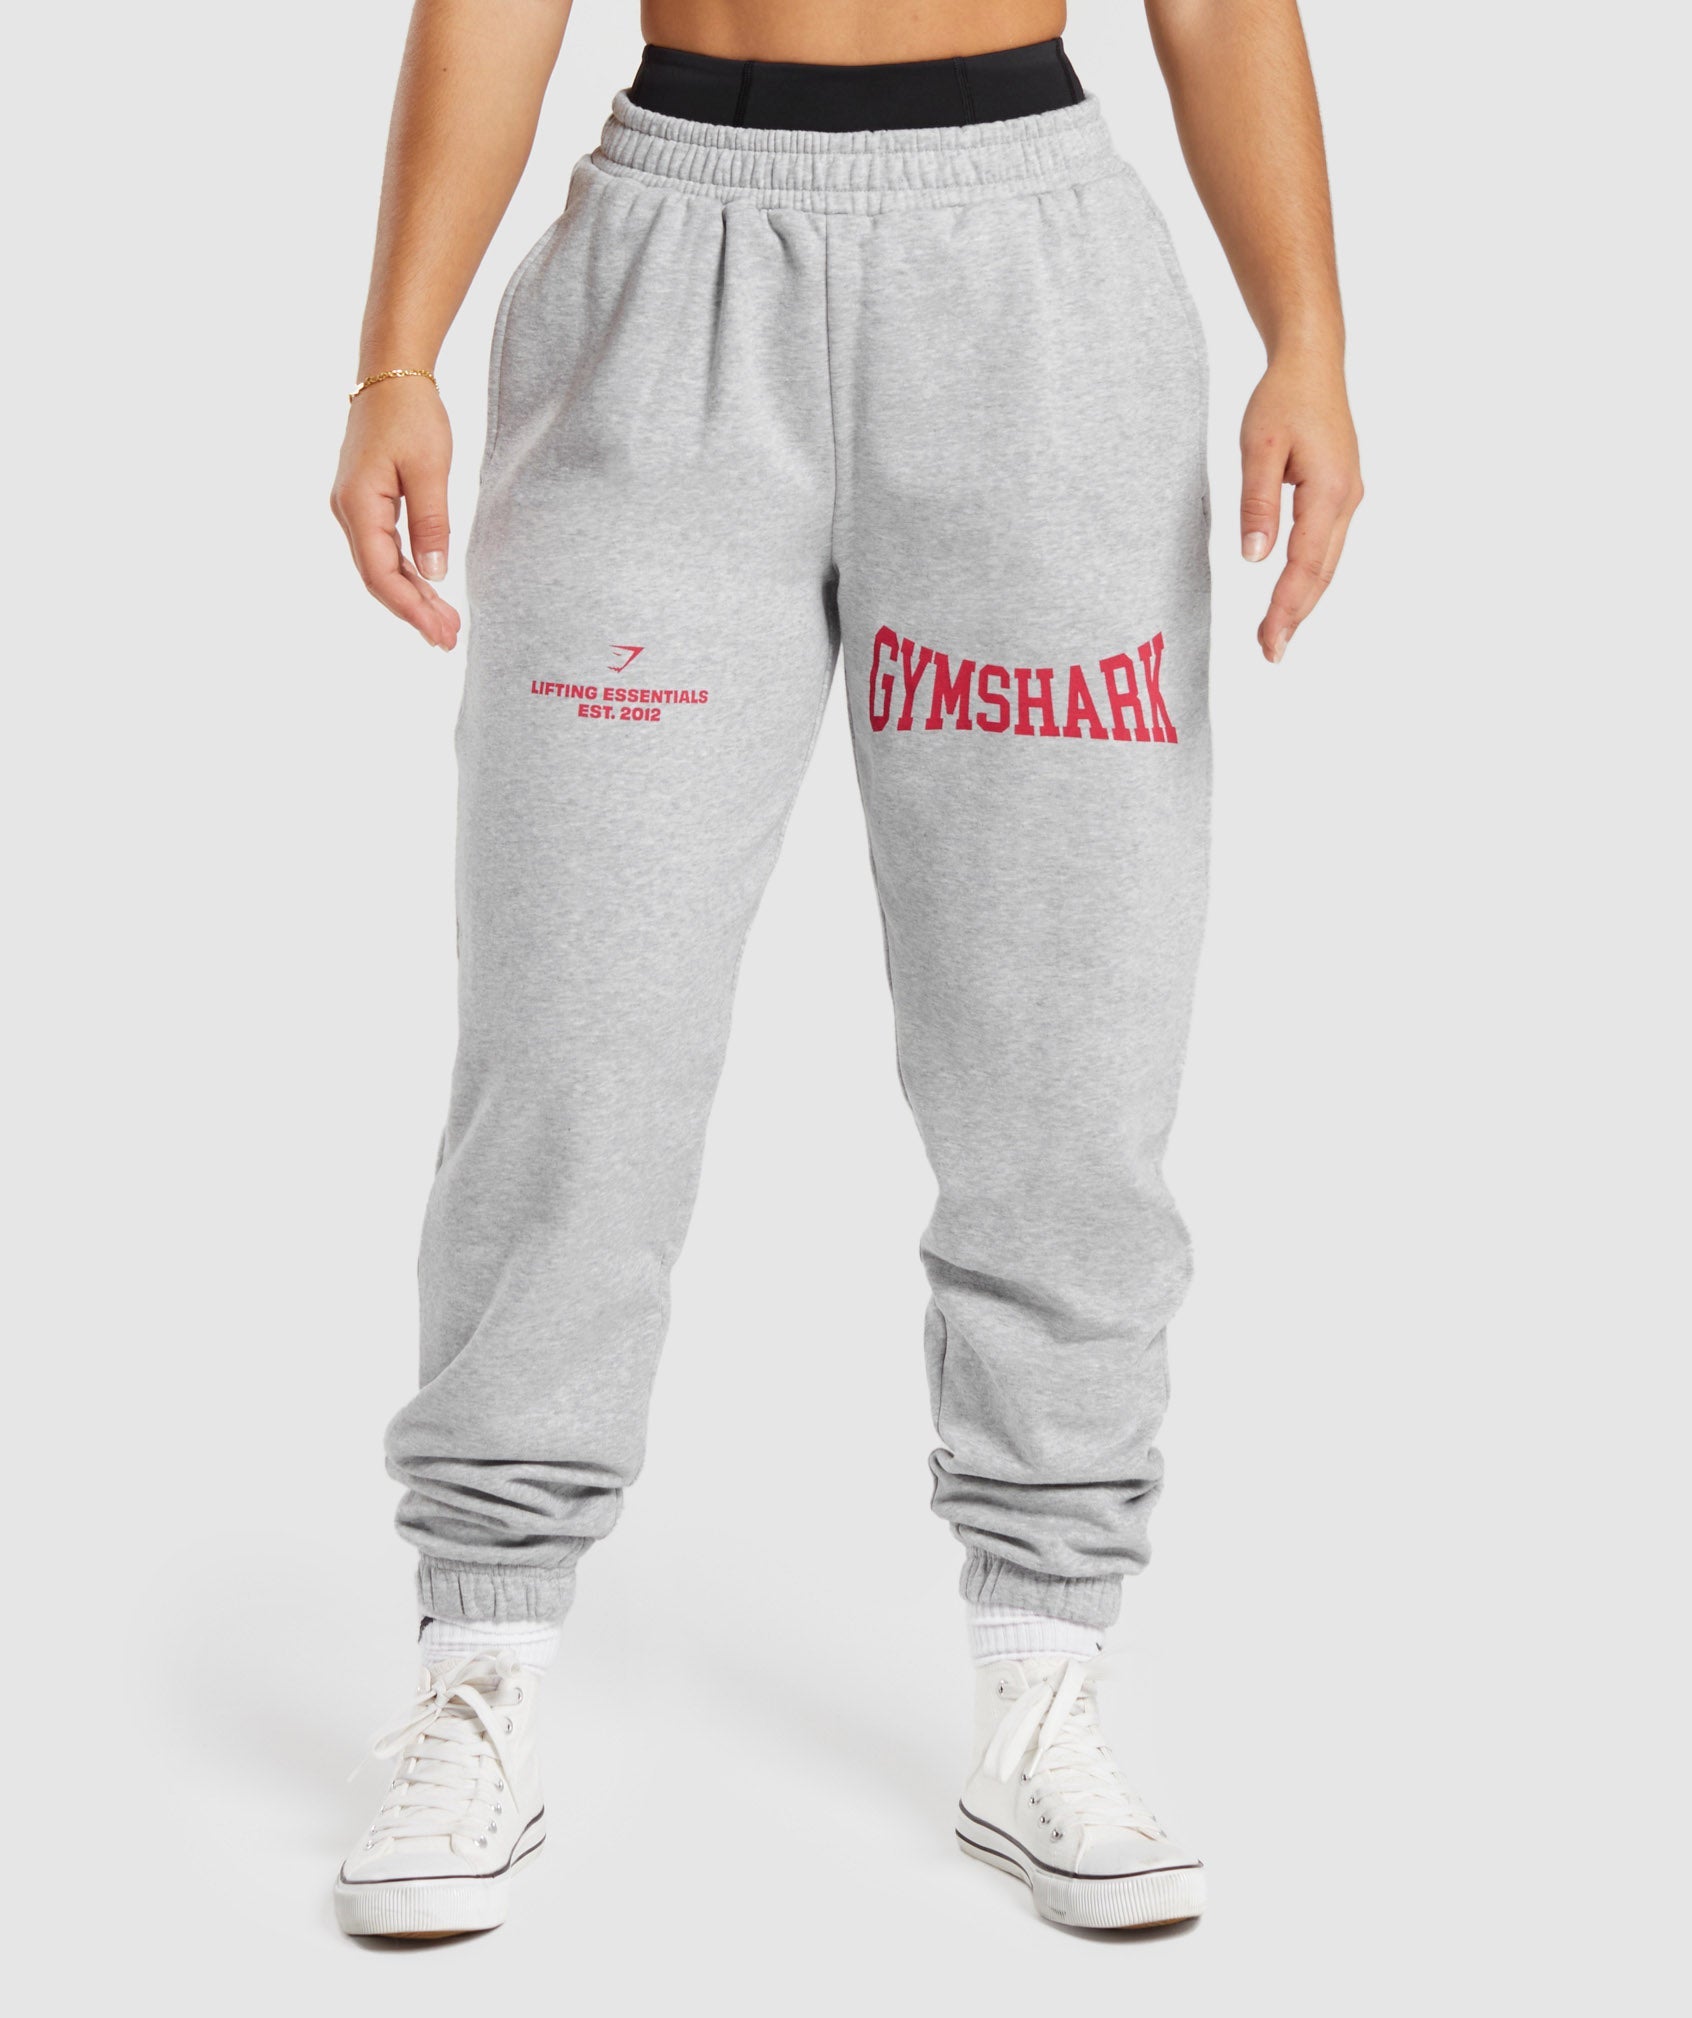 Gymshark Lifting Essentials Graphic Joggers - Pebble Grey